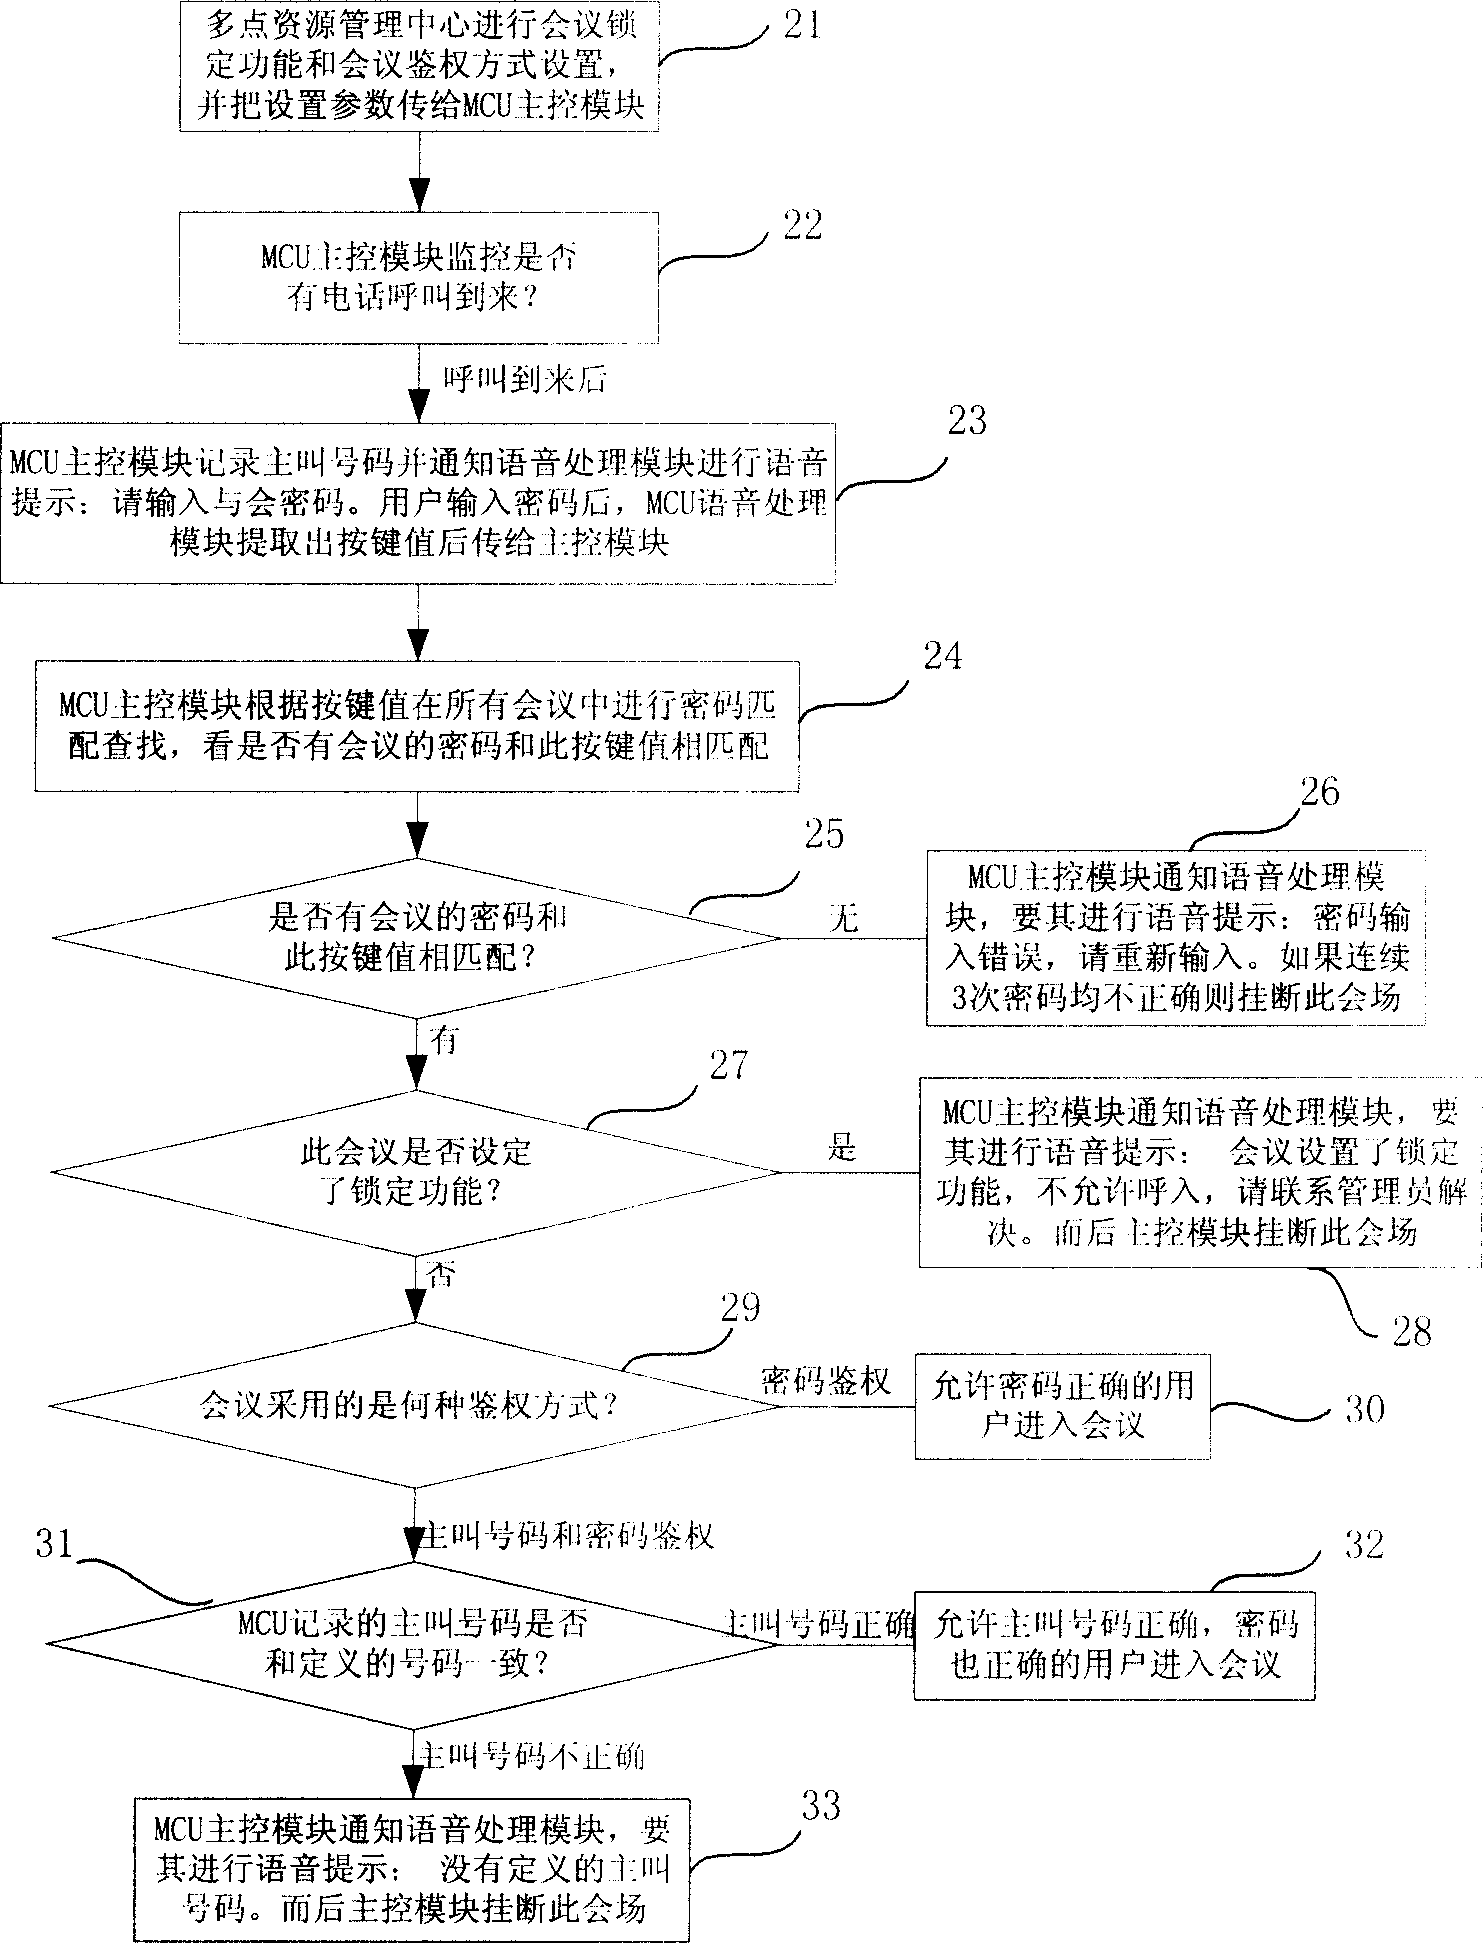 Method for implementing telephone conference